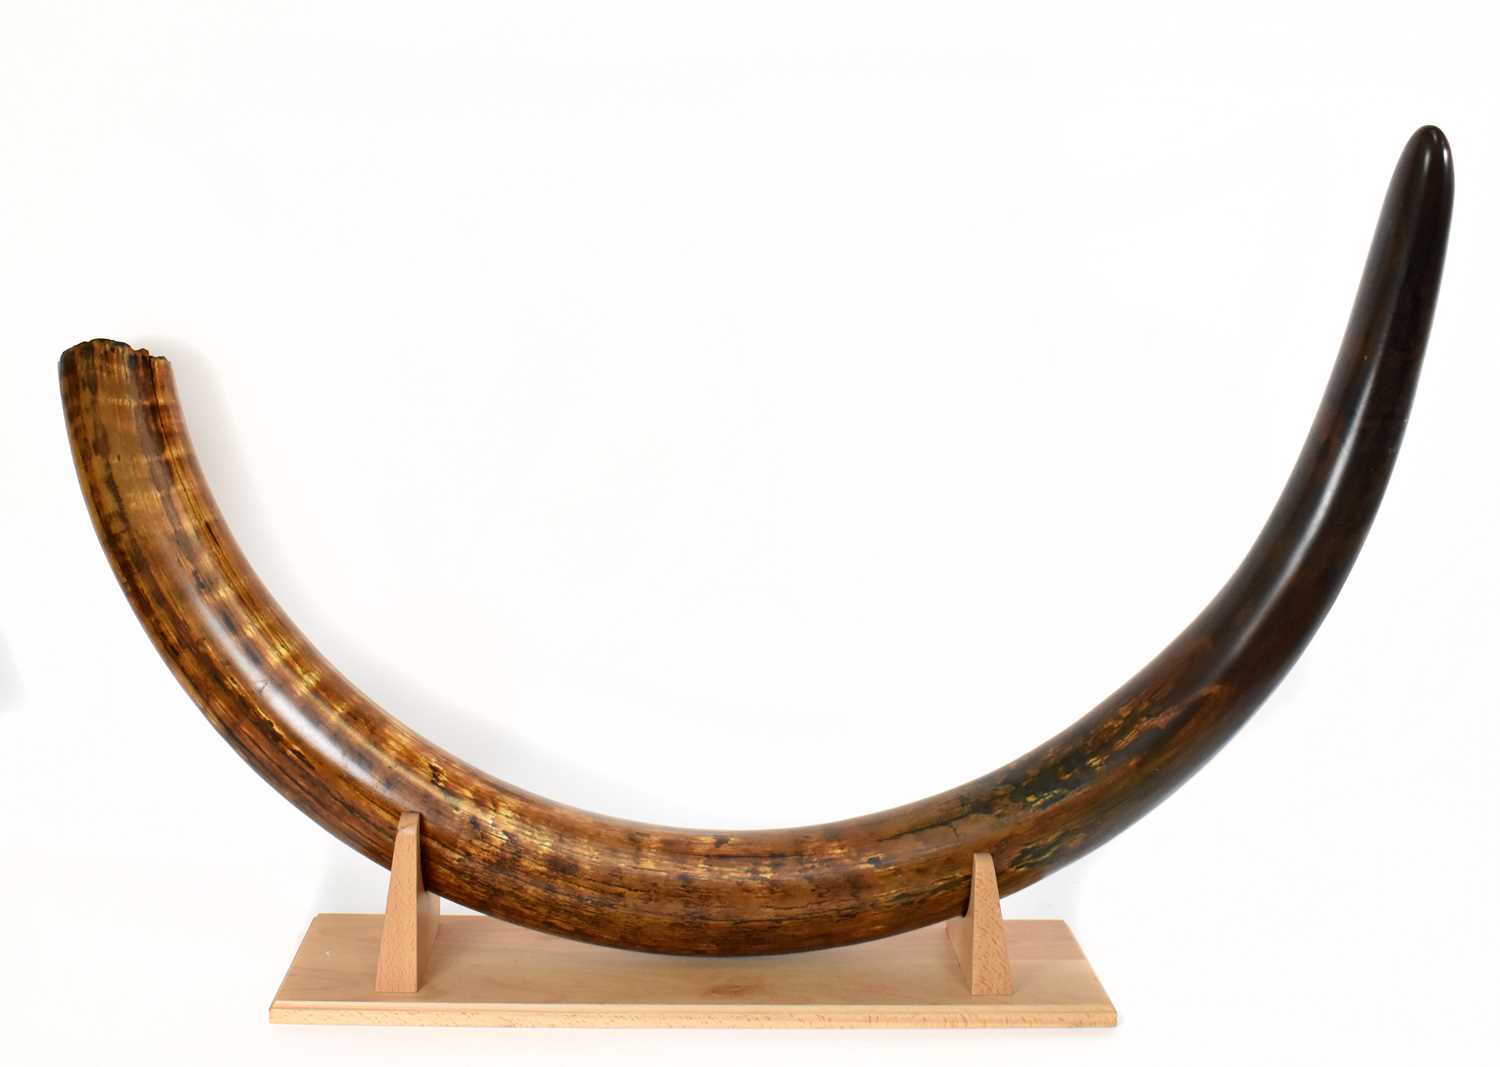 NATURAL HISTORY; a woolly mammoth tusk (Mammuthus primigenius), 8000BC or earlier, length 212cm,